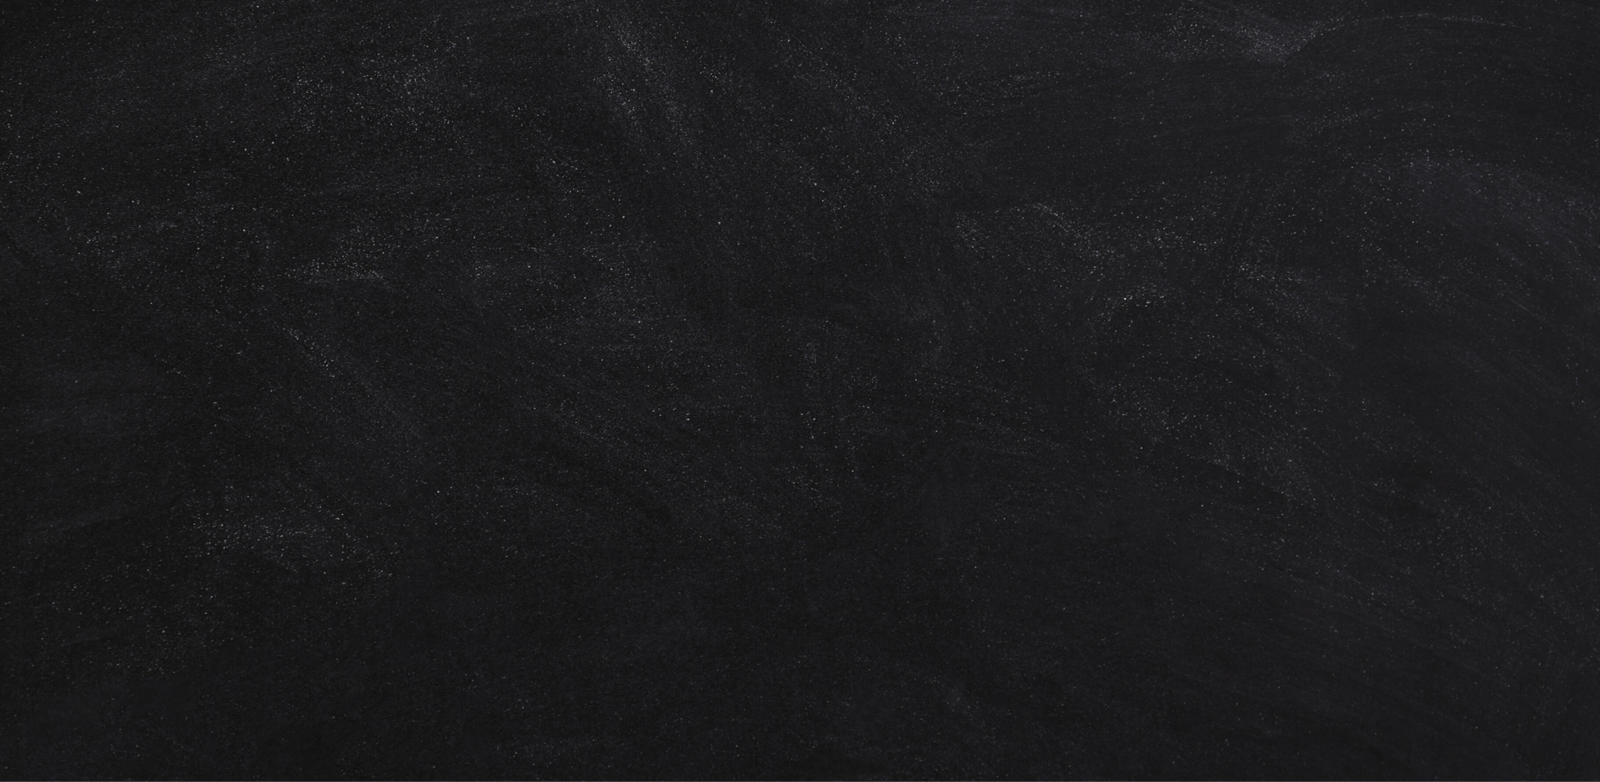 286+ Thousand Chalkboard Texture Royalty-Free Images, Stock Photos